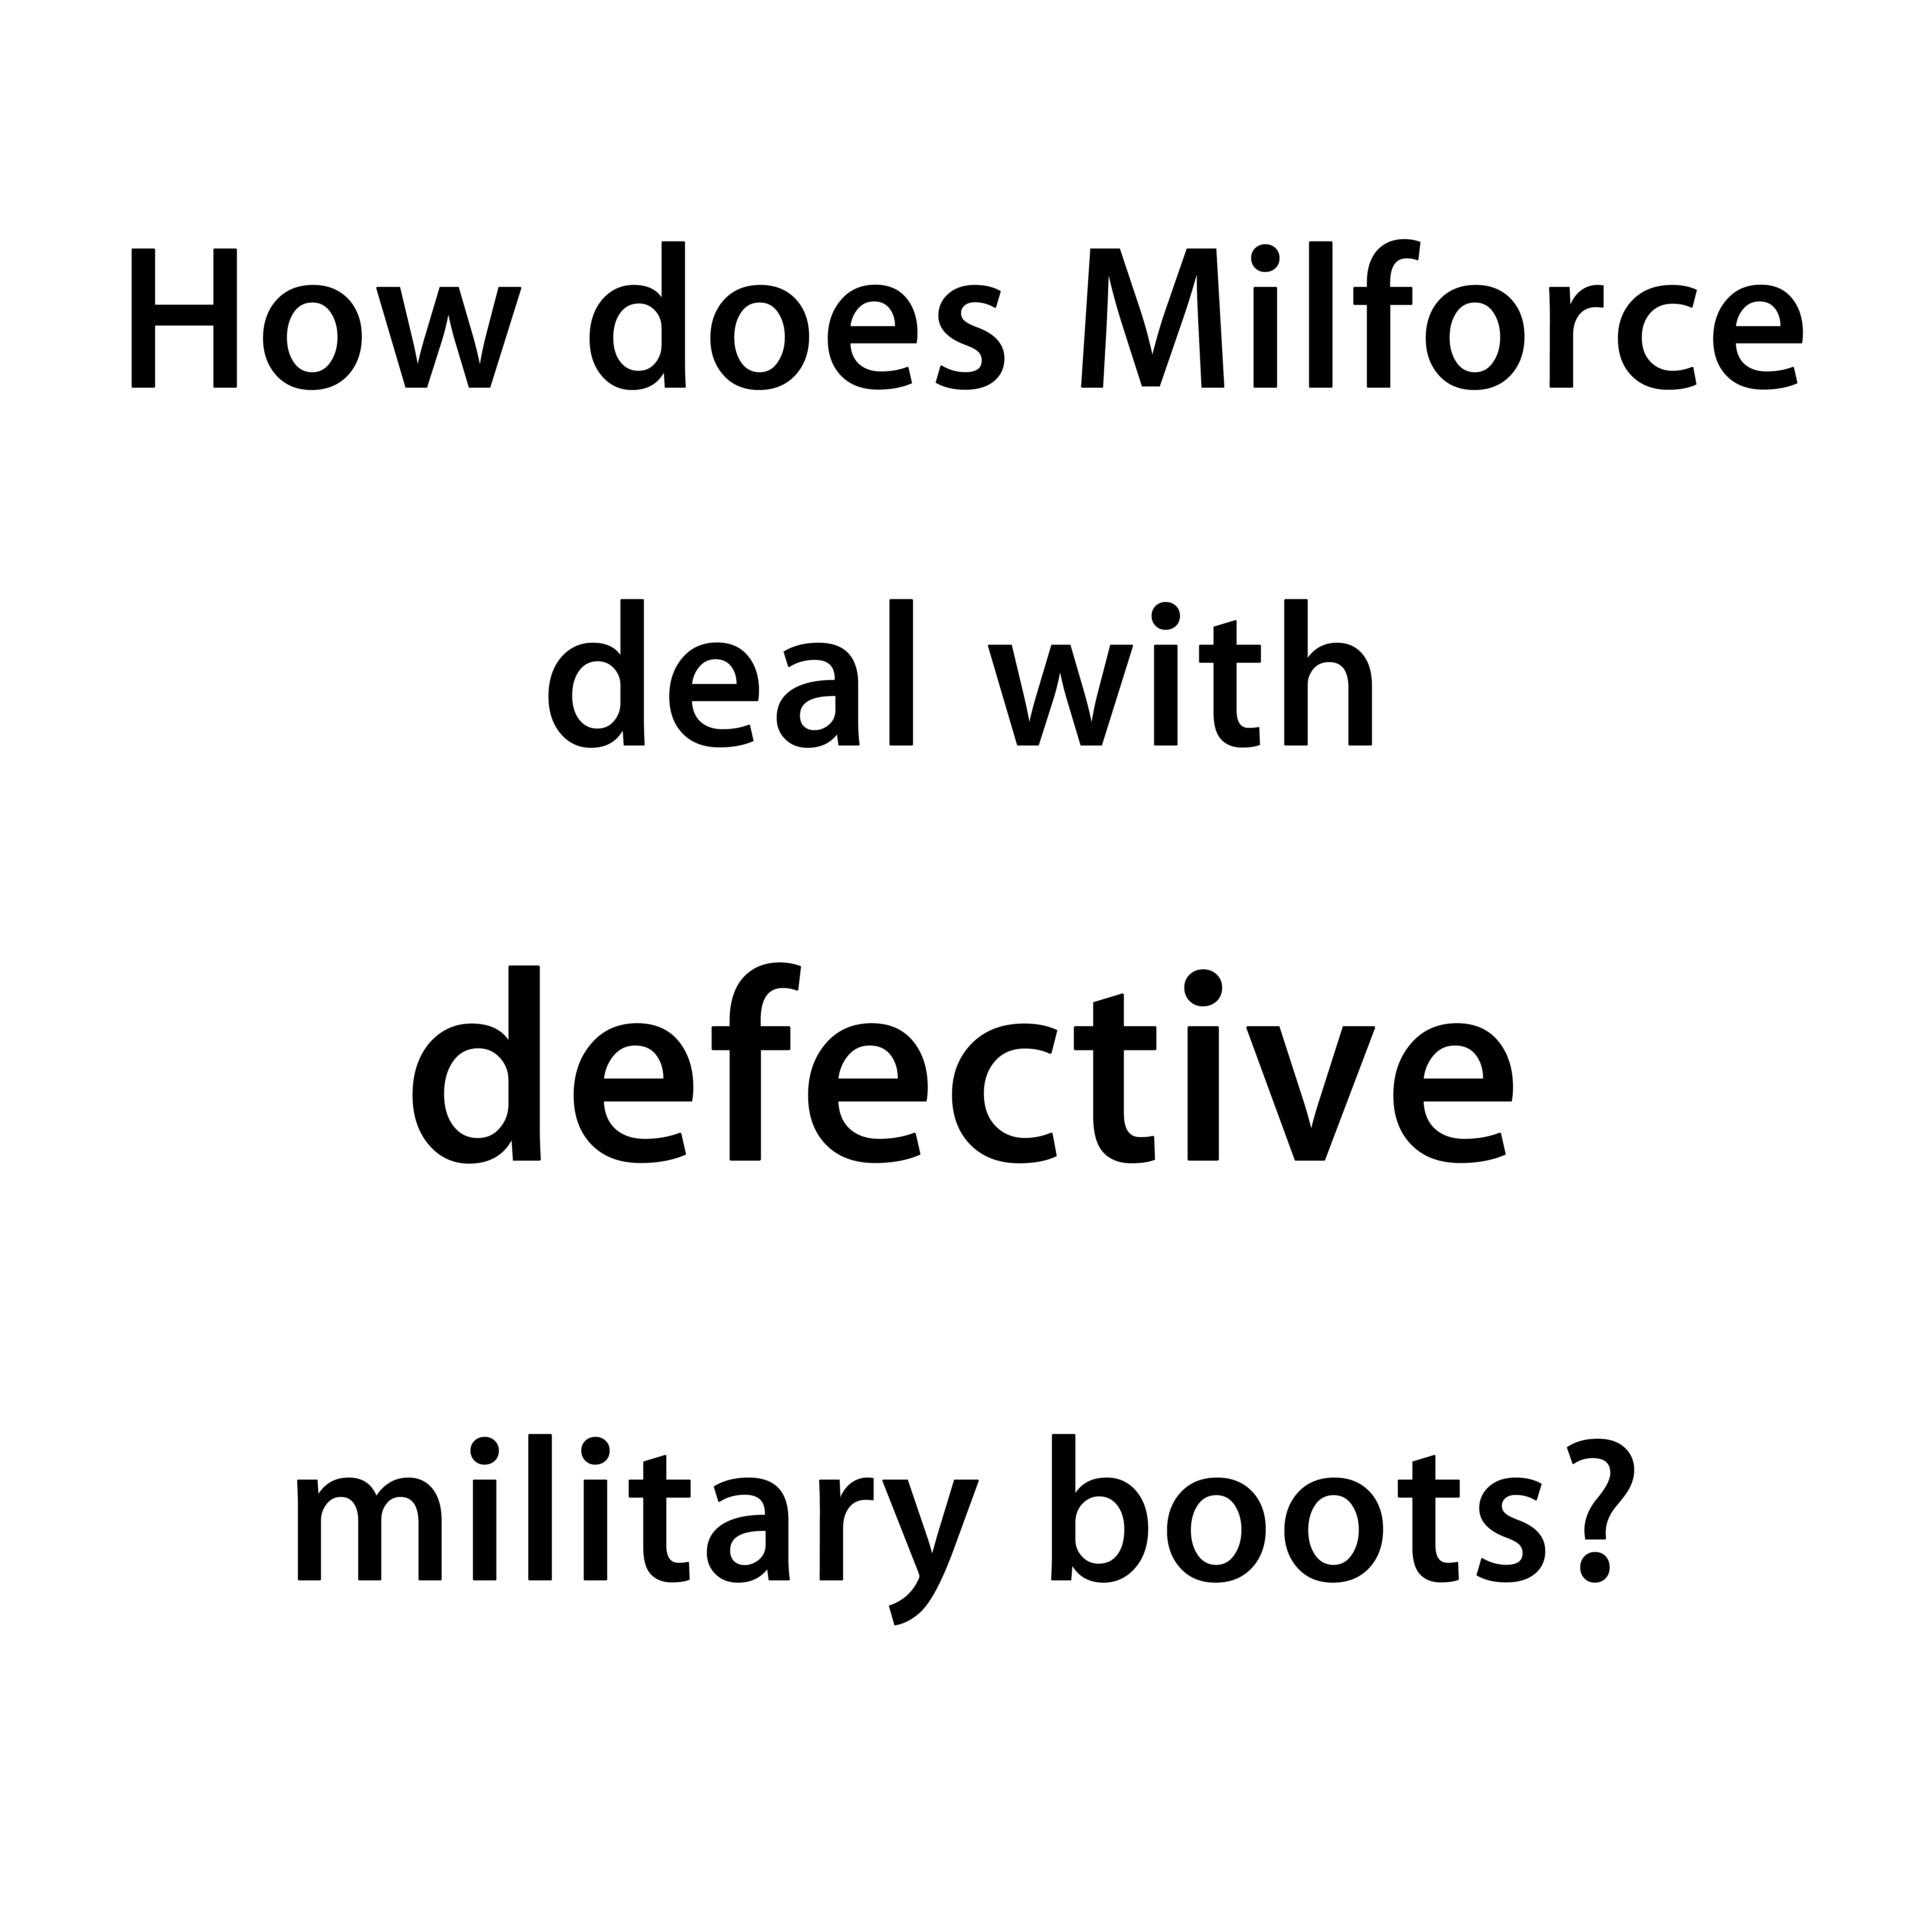 How does Milforce deal with defective military boots?